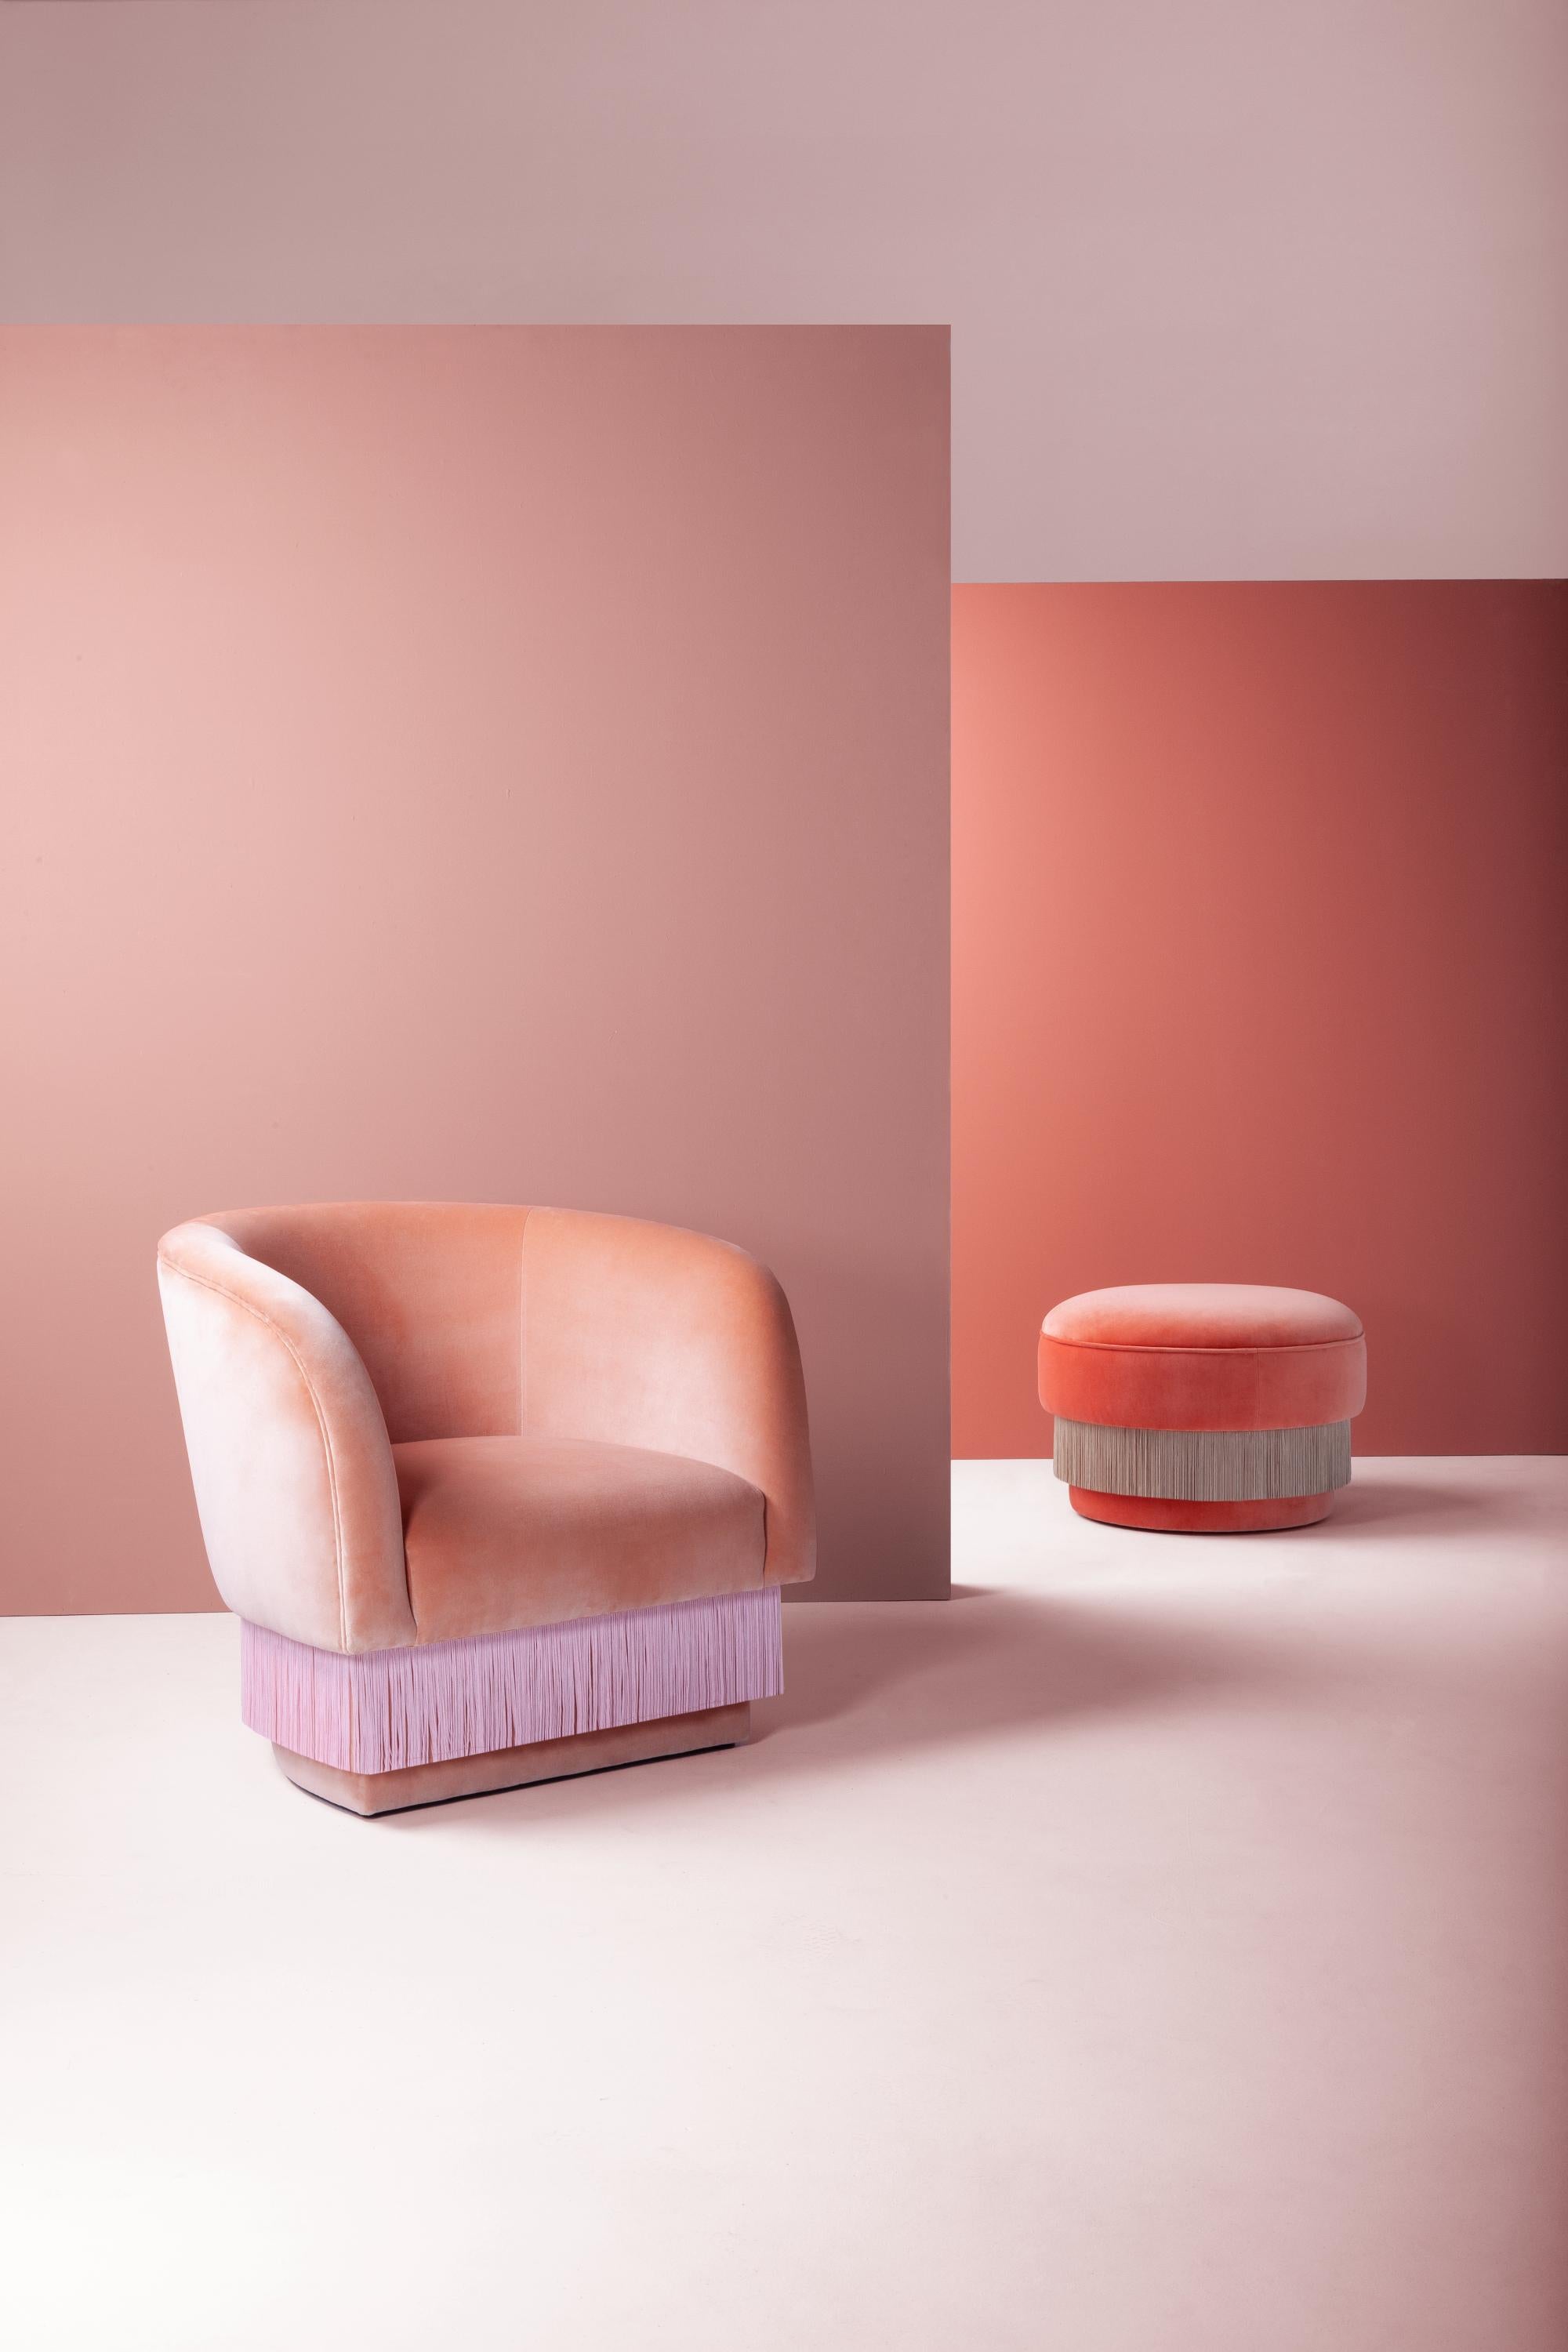 Folie Armchair by Dooq
Measures: W 82 cm 32”
D 70 cm 28”
H 75 cm 30”
seat height: 42 cm 17”

Materials: upholstery and piping fabric or leather, fringes.

Dooq is a design company dedicated to celebrate the luxury of living. Creating designs that